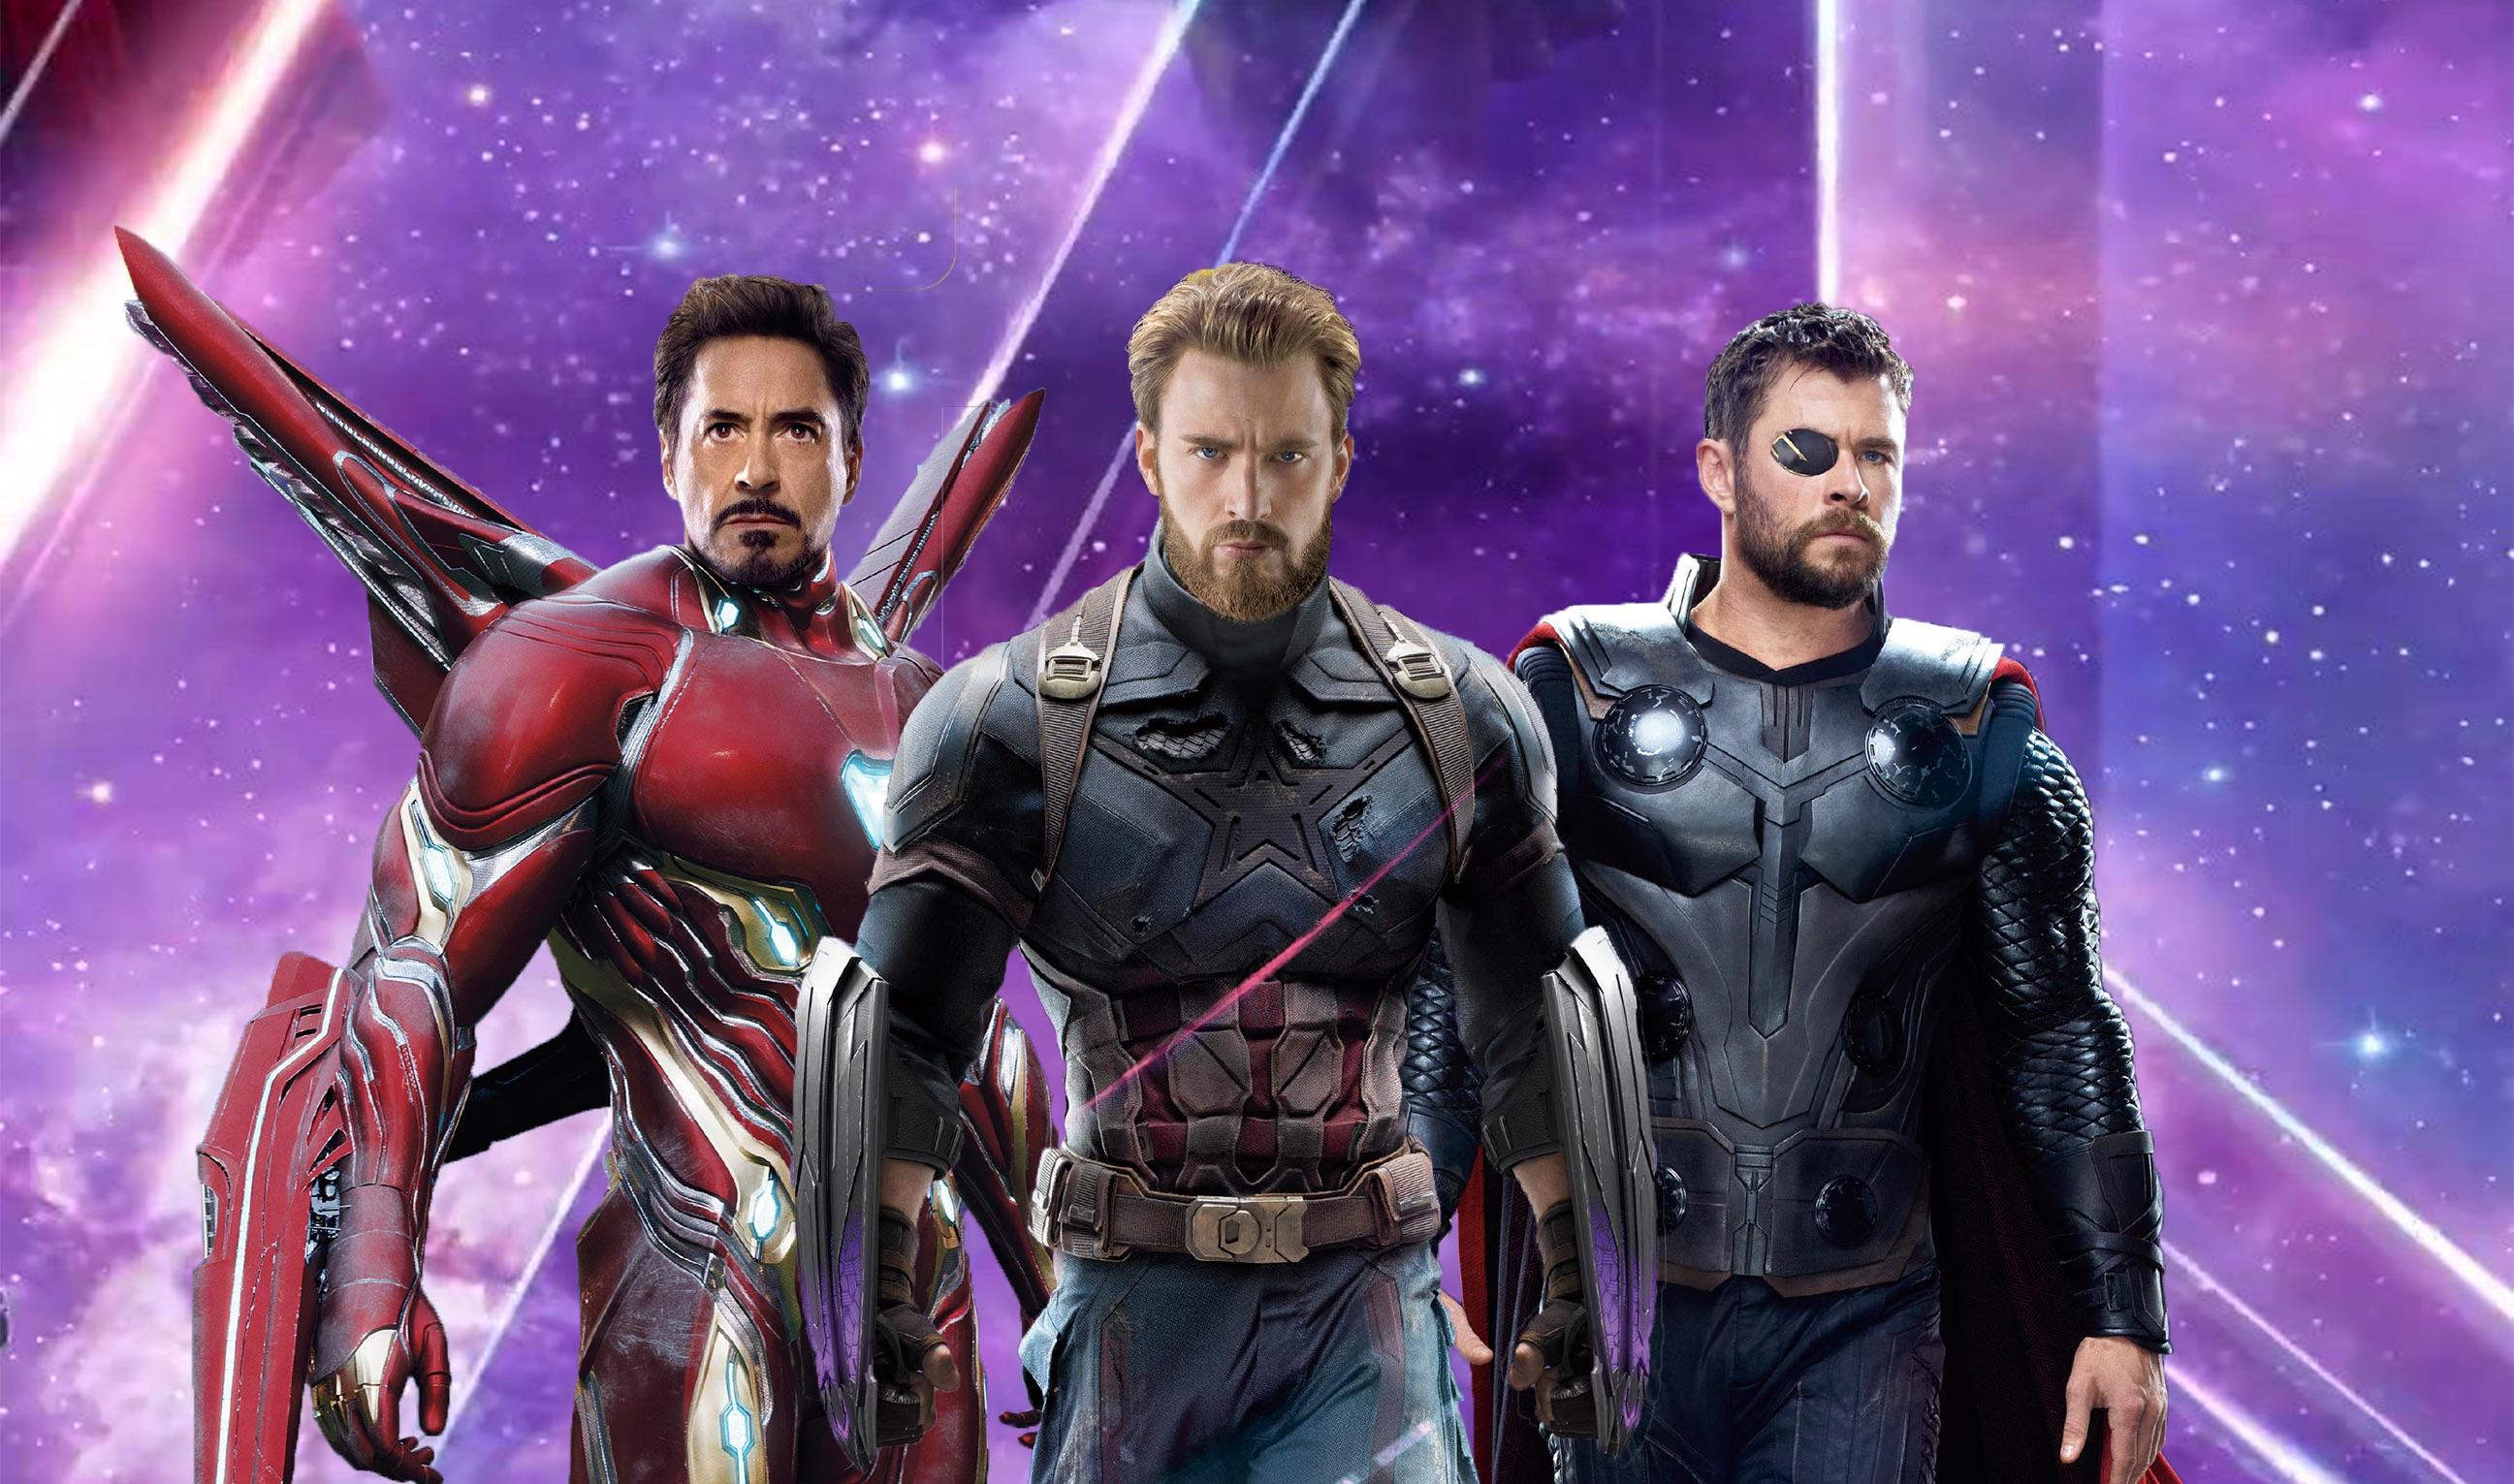 Iron Man Captain America Thor In Avengers Infinity War Poster, HD Movies, 4k Wallpaper, Image, Background, Photo and Picture